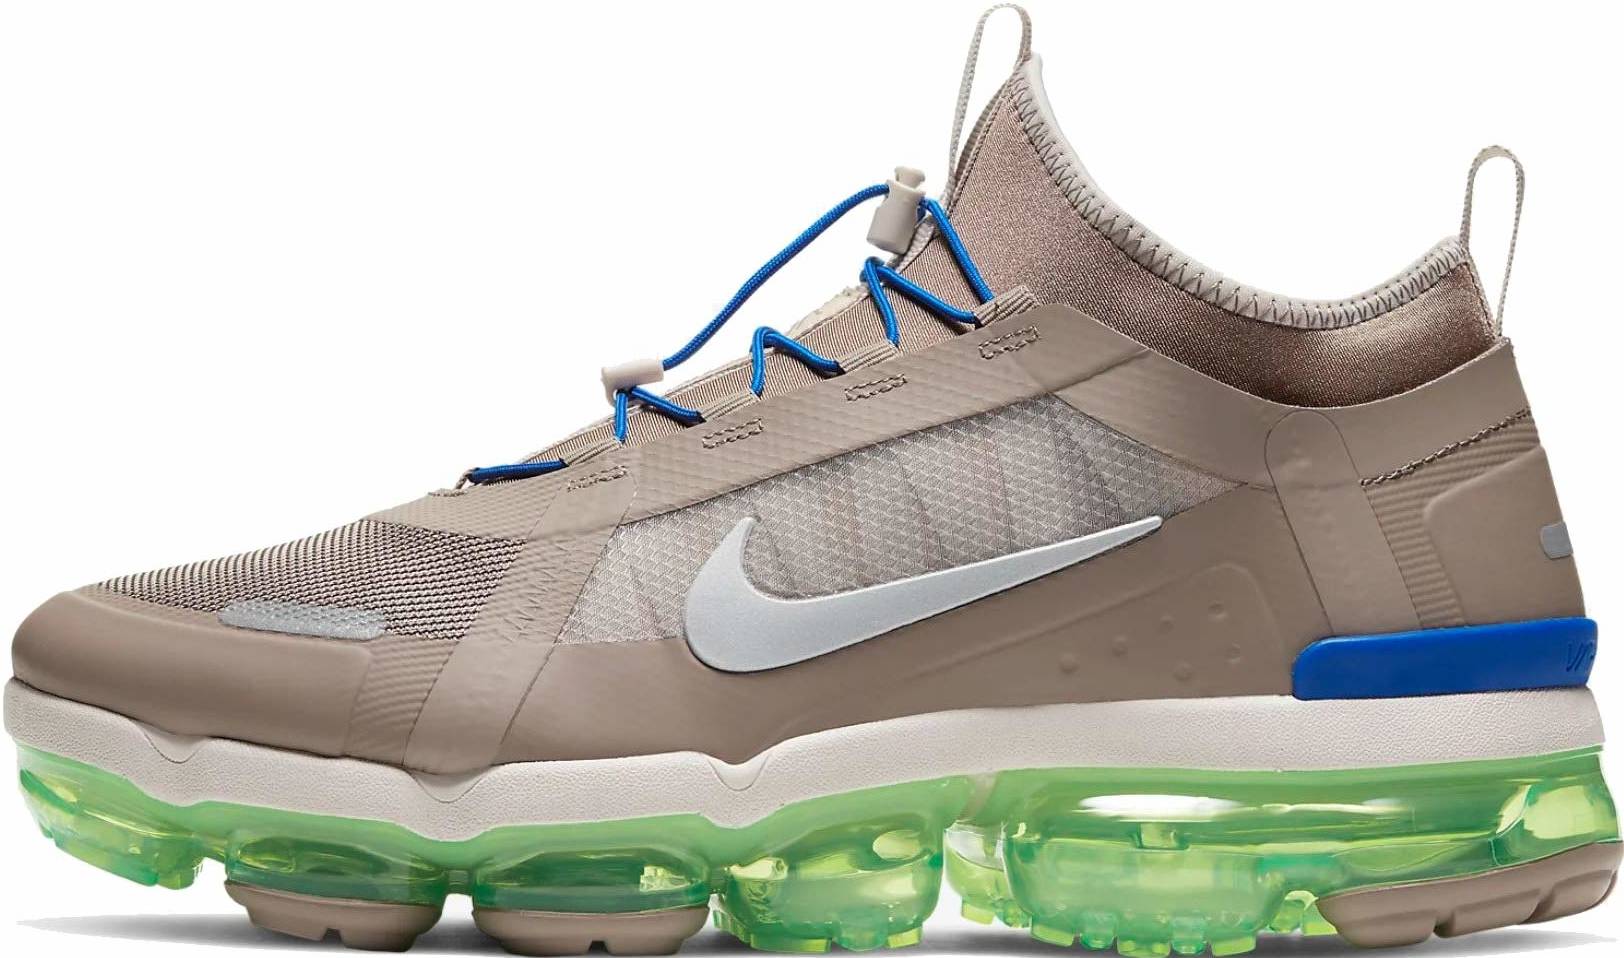 Nike Vapormax 2019 Utility sneakers in grey blue (only $156 ...